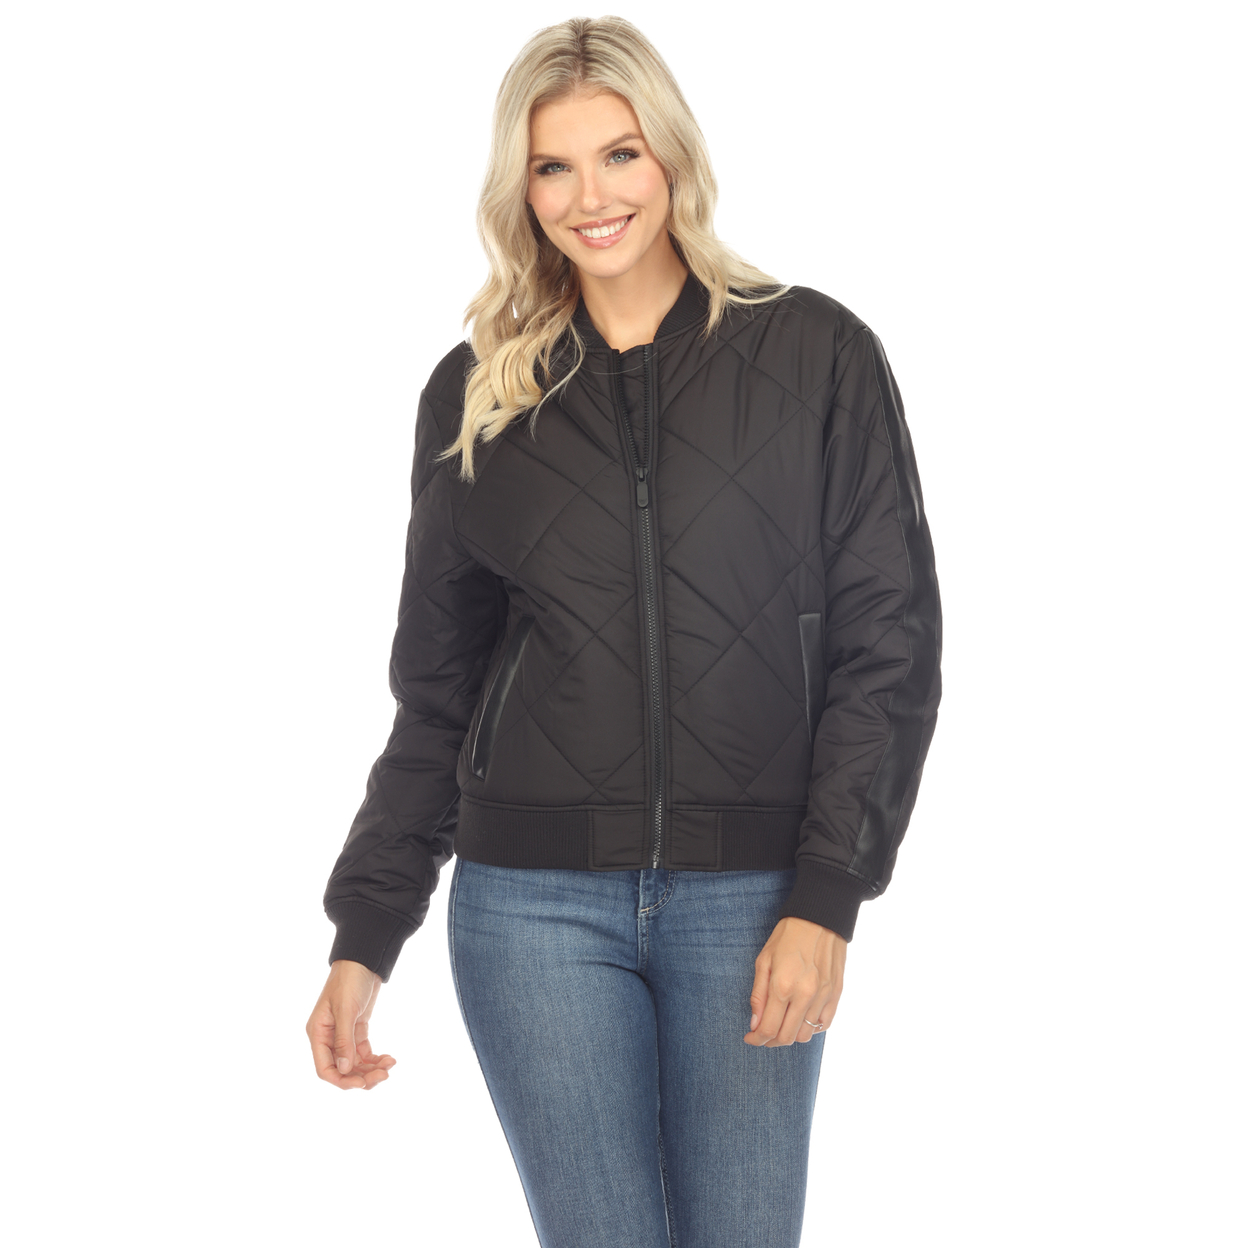 White Mark Women's Quilted Puffer Bomber Jacket - Black, X-large